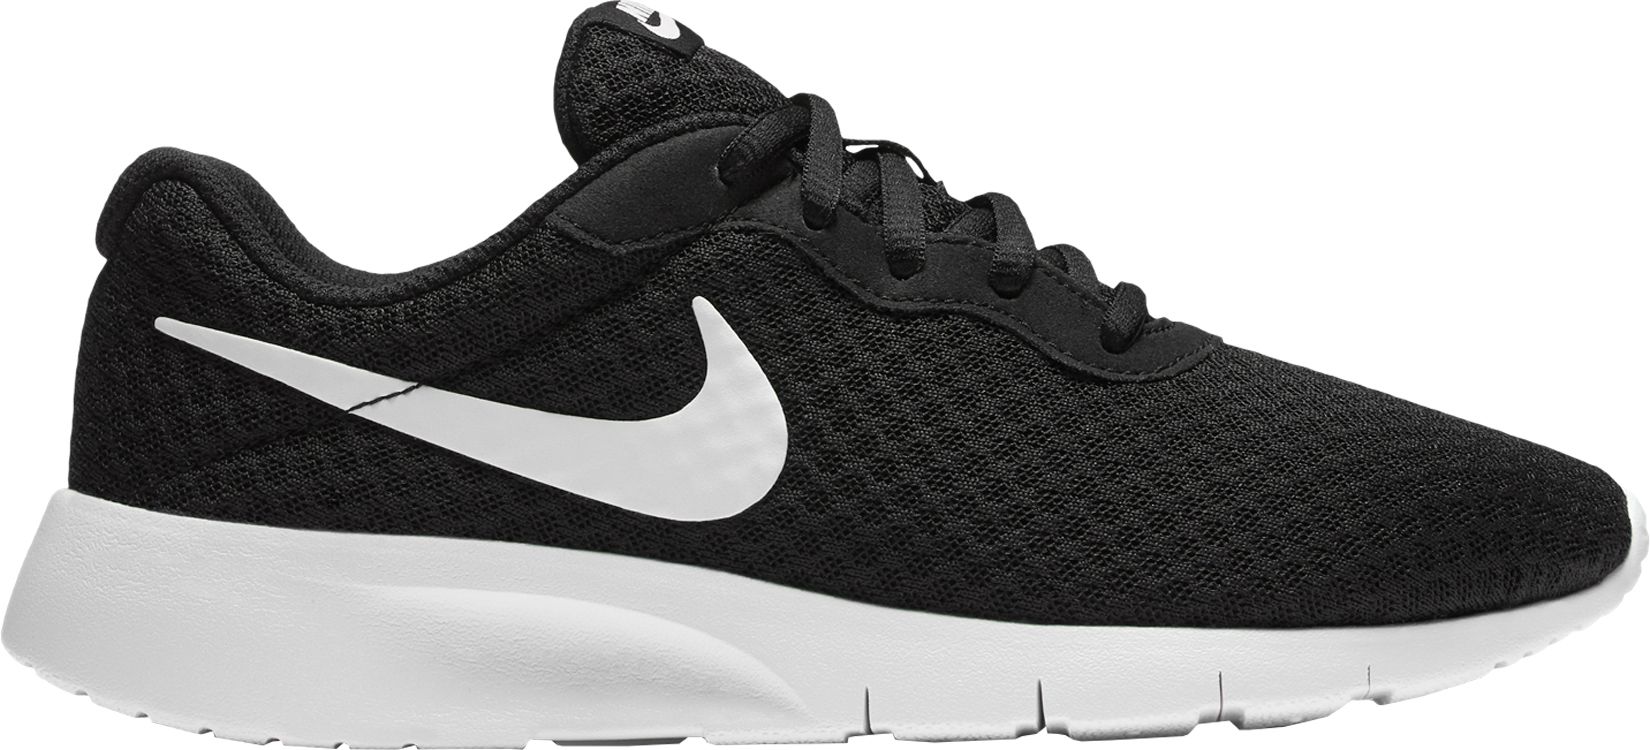 black and white nikes for girls